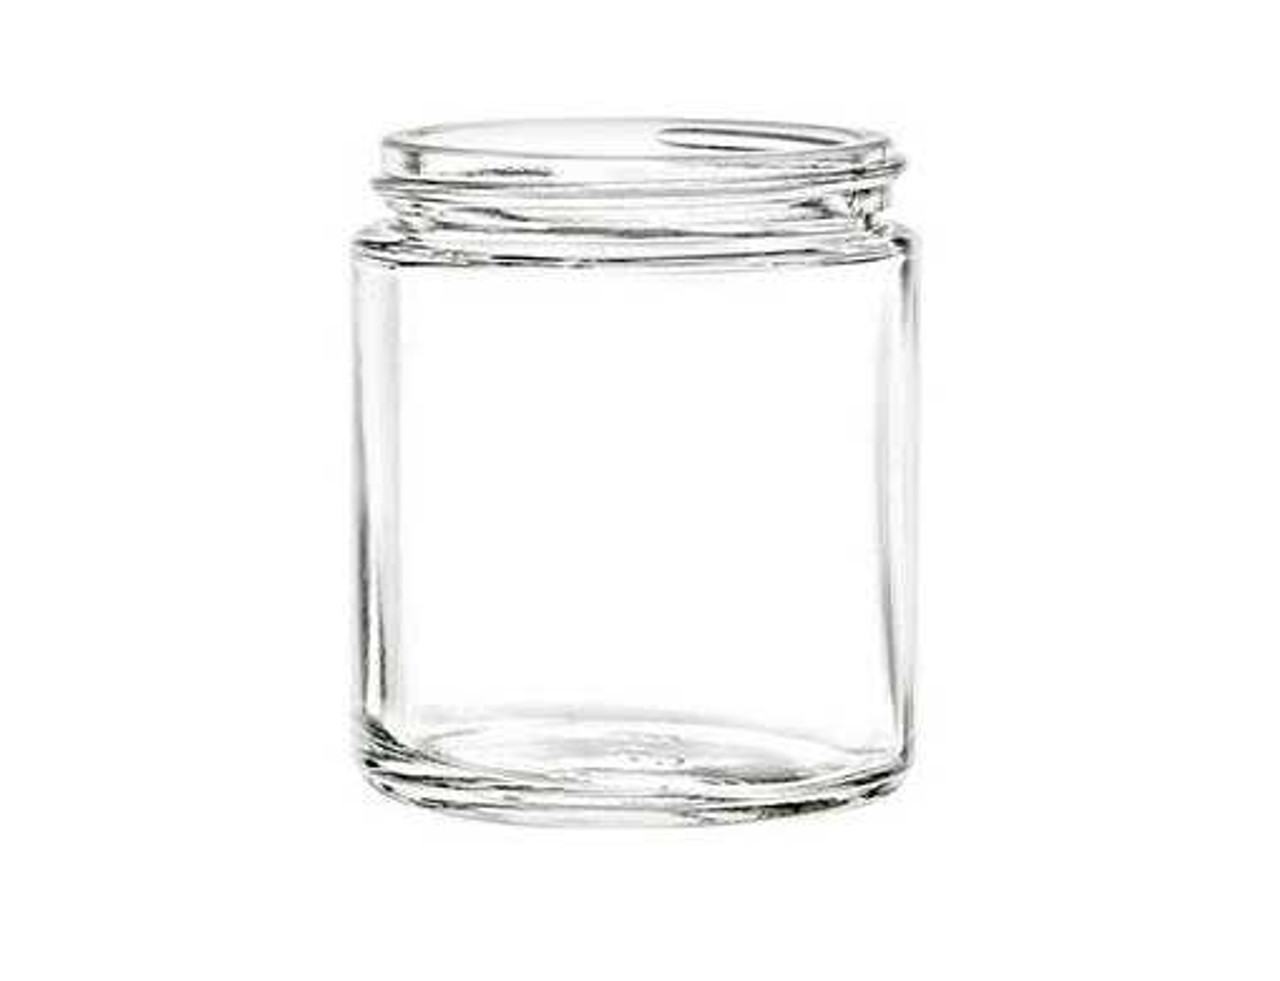 2 oz Straight Sided Glass Jar with Shaker Spice Caps